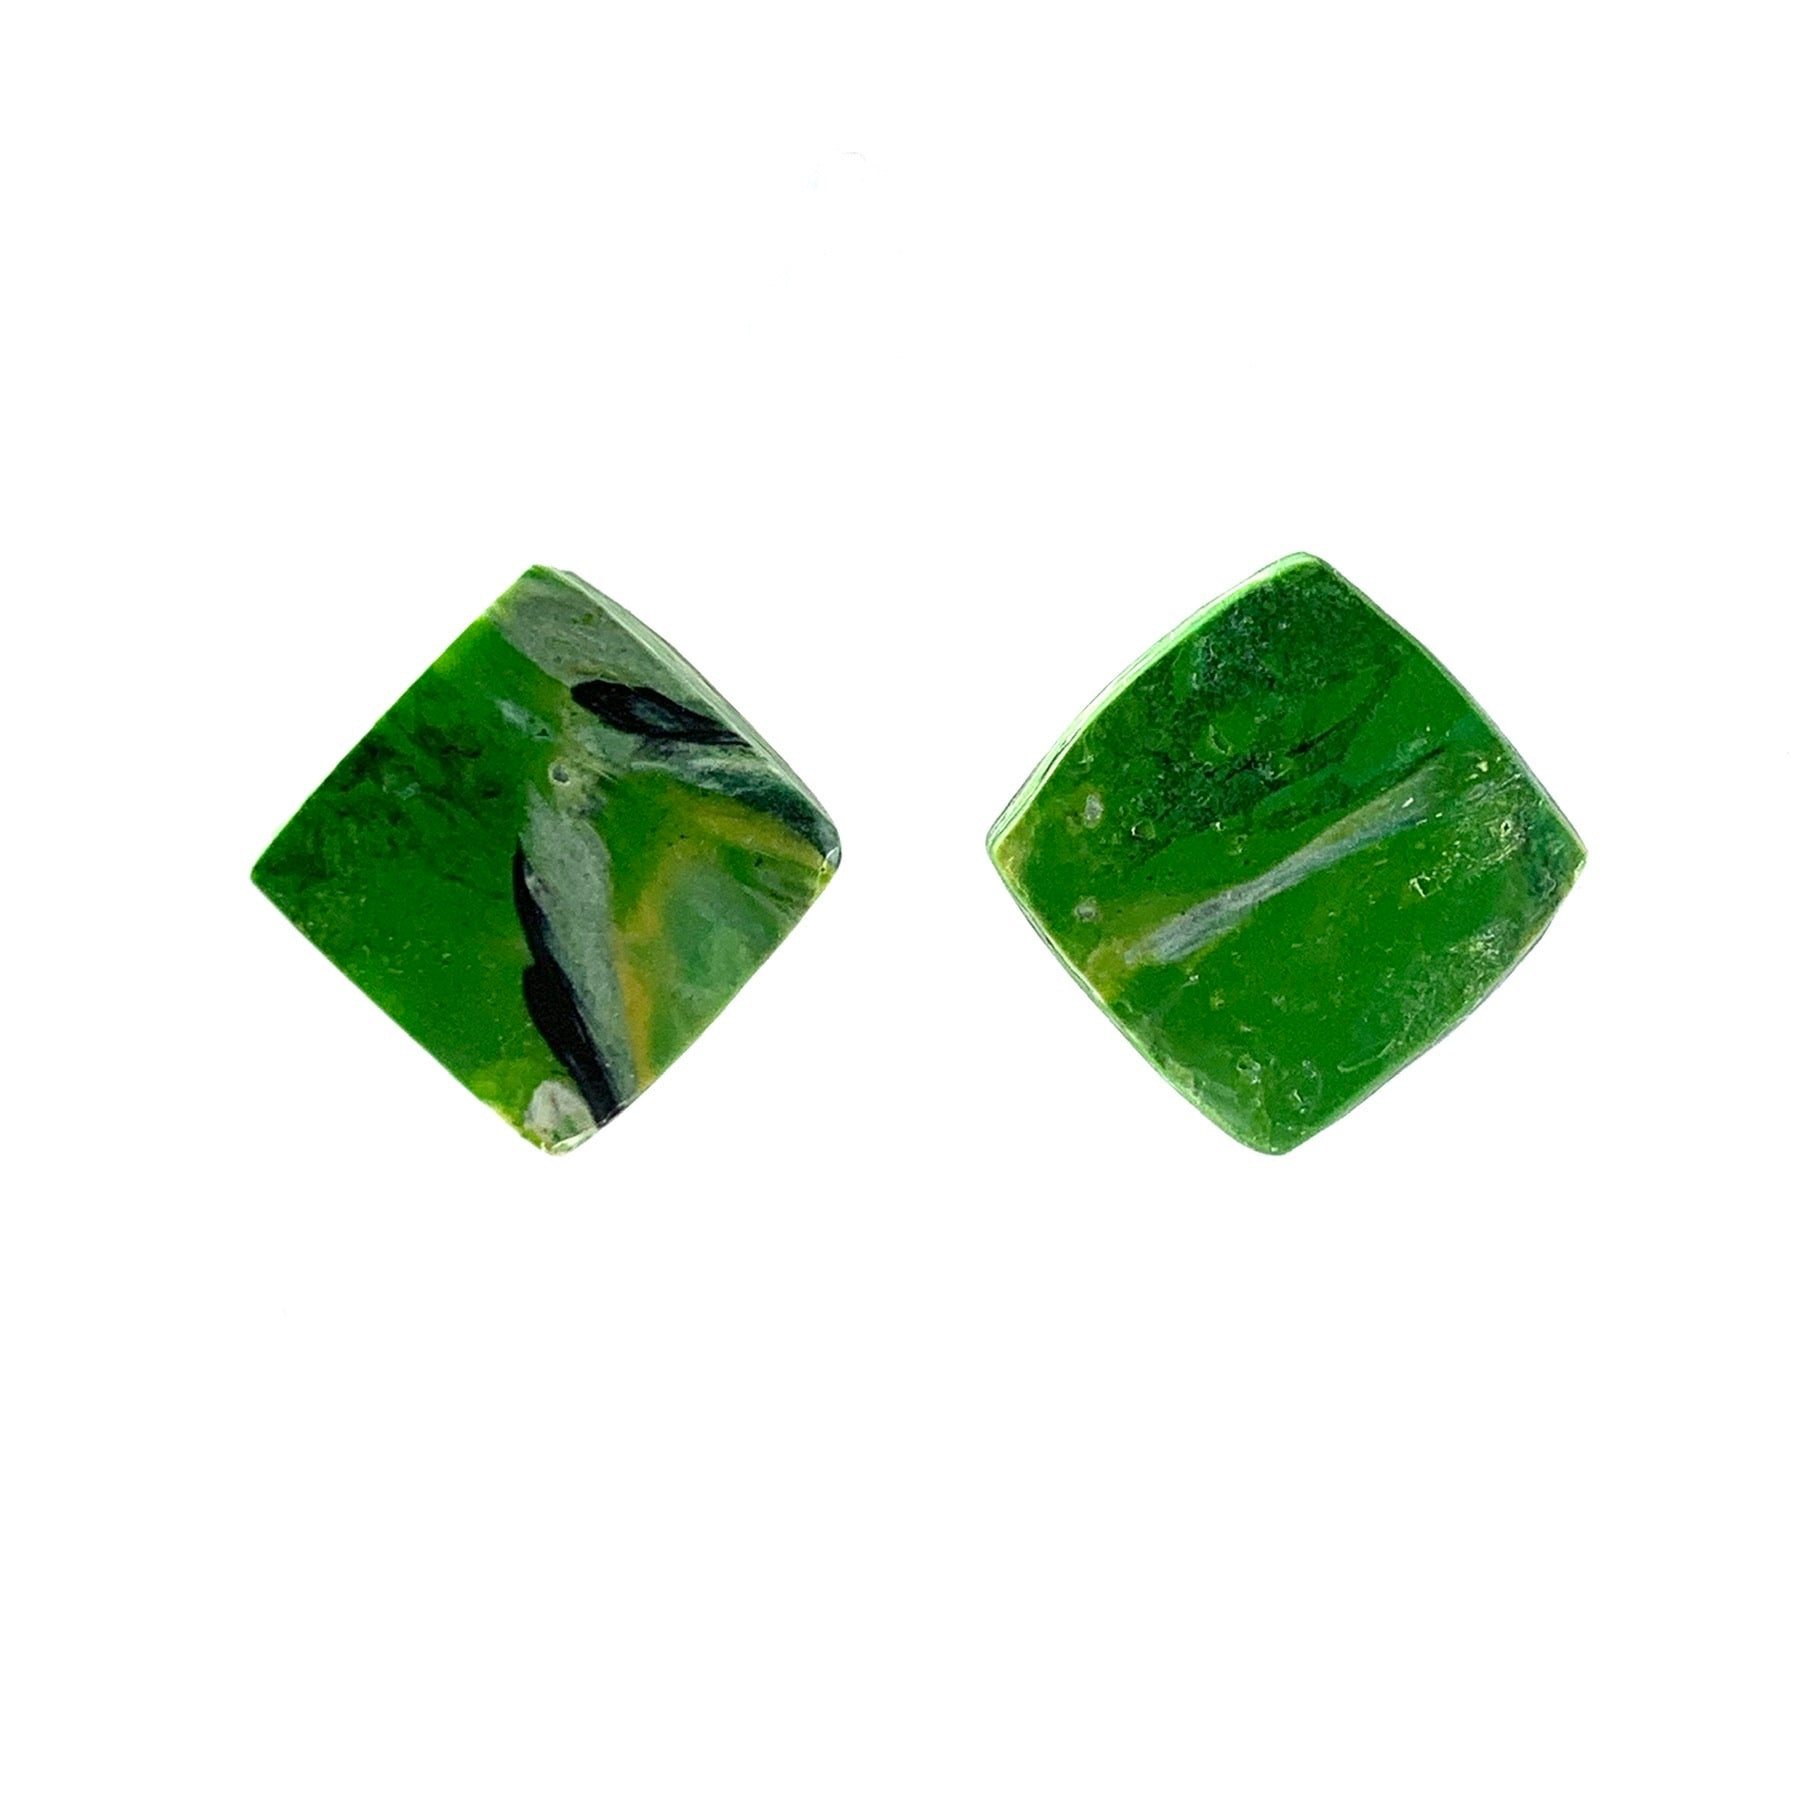 Handmade Green Studs Sustainable Recycled Plastic Green Gift for mum ecofriendly